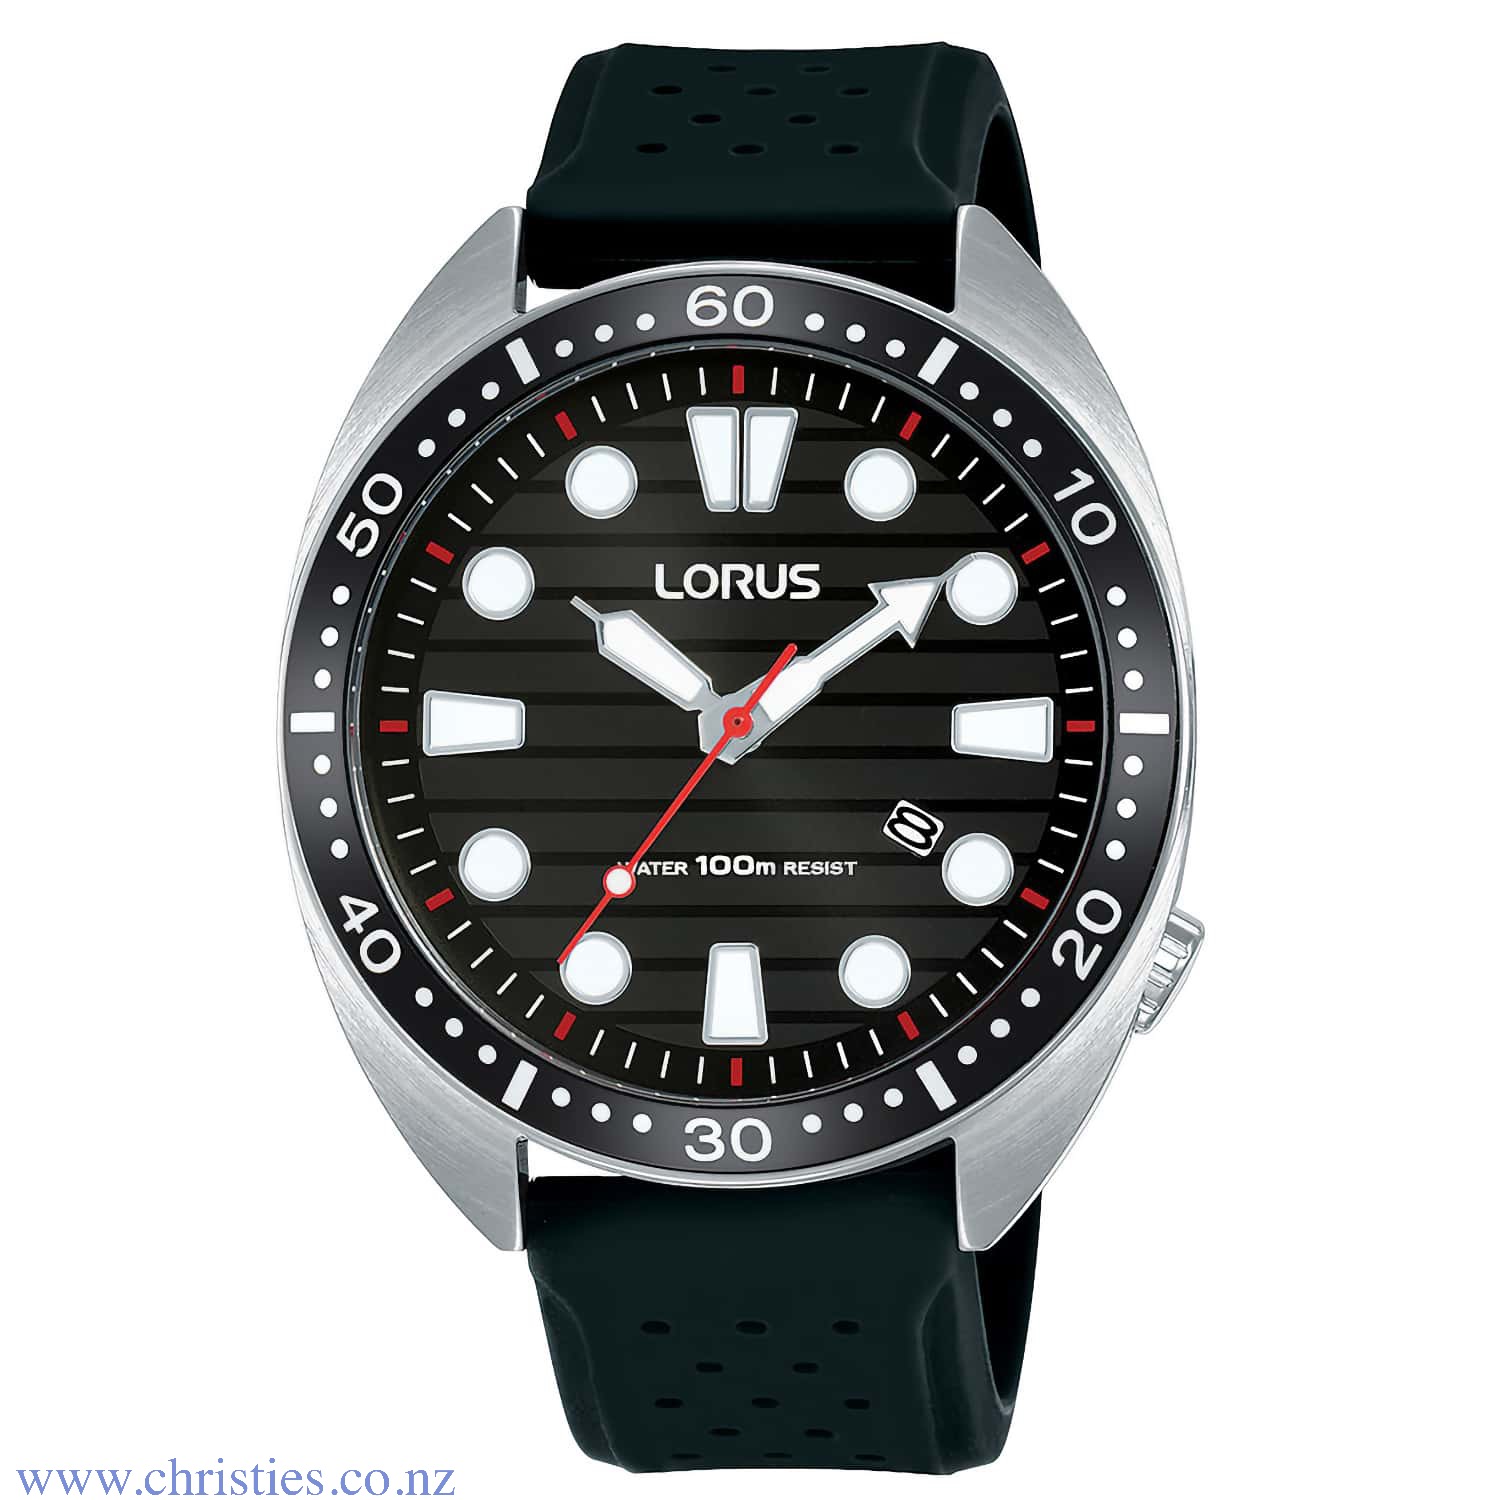 RH929LX-9 Lorus Mens 100 Metre Watch. A Lorus mens 100 metres watch with date Humm -Buy Little things up to $1000 and choose 10 weekly or 5 fortnightly payments with no interest. Late payment fee of $10 will apply. 2 Year Guarantee Dial Black @christies.o